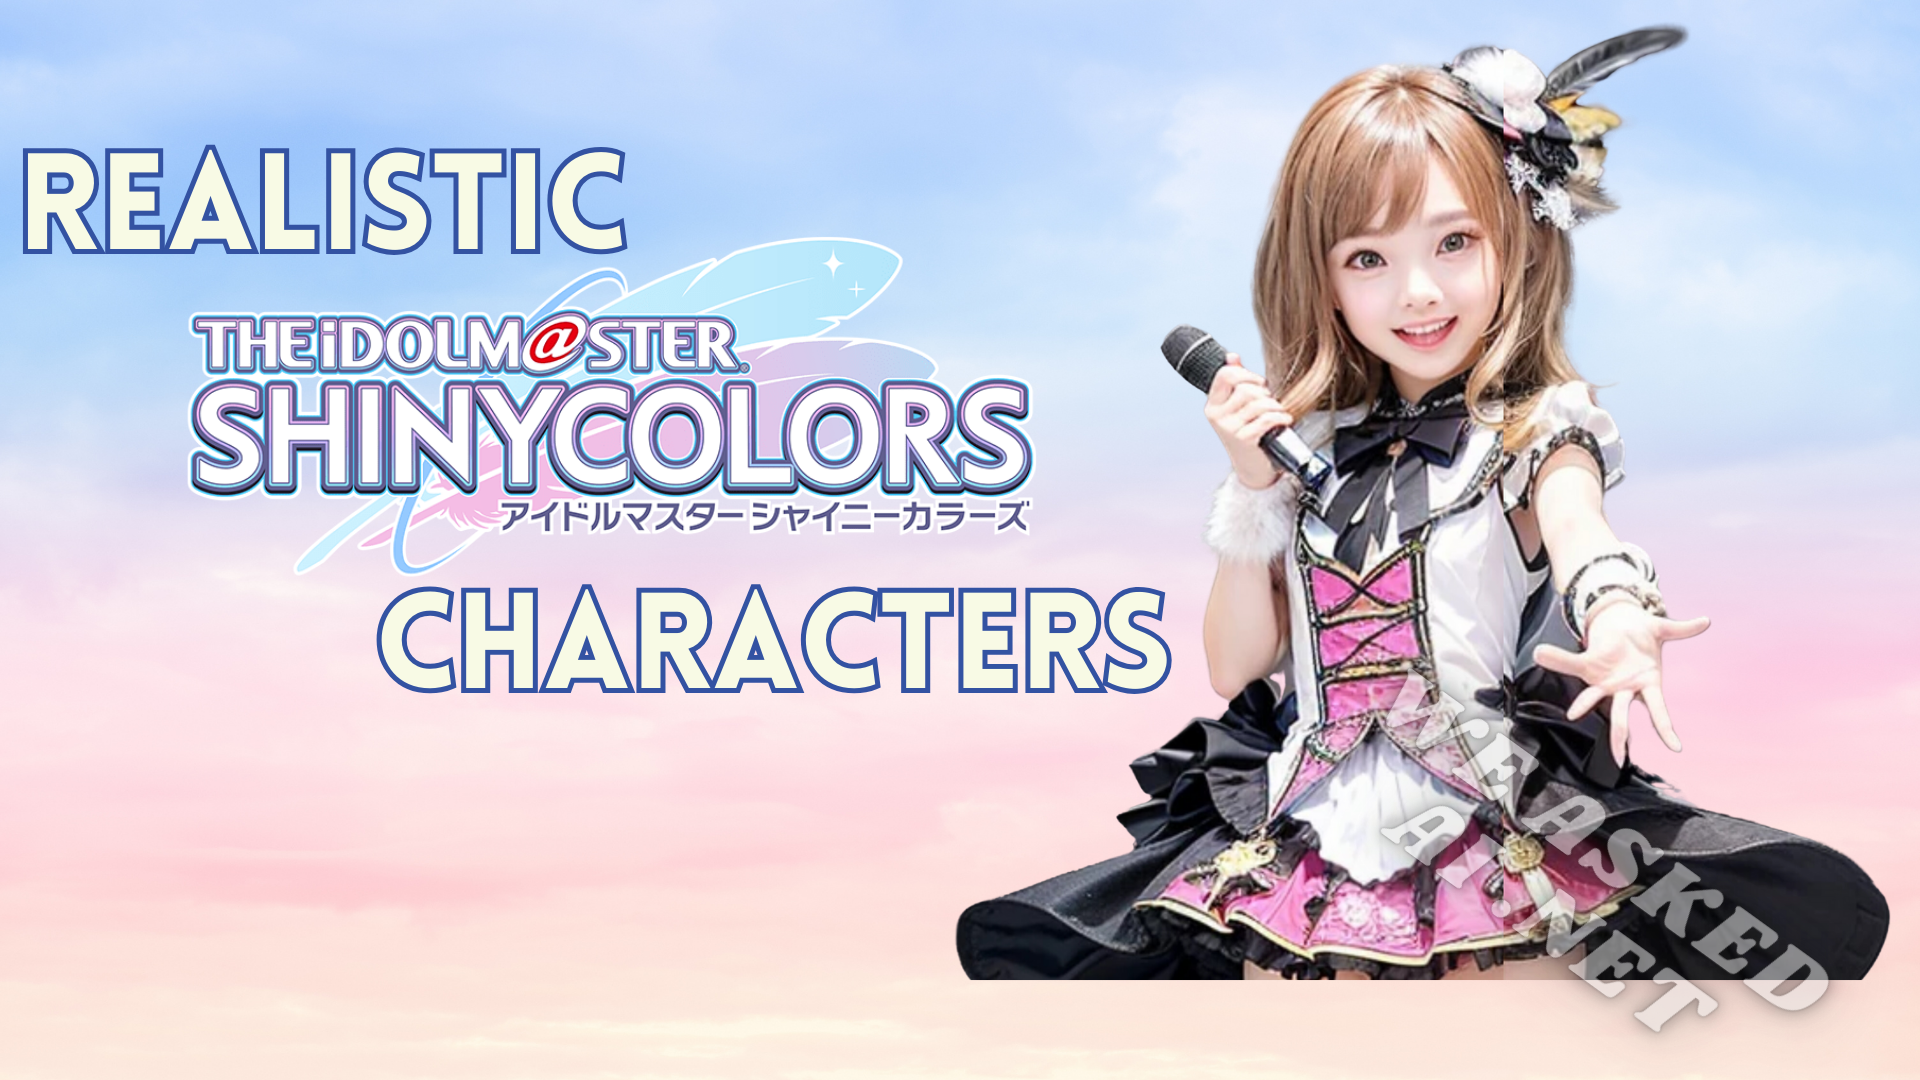 Realistic Idolmaster Shinycolors Characters